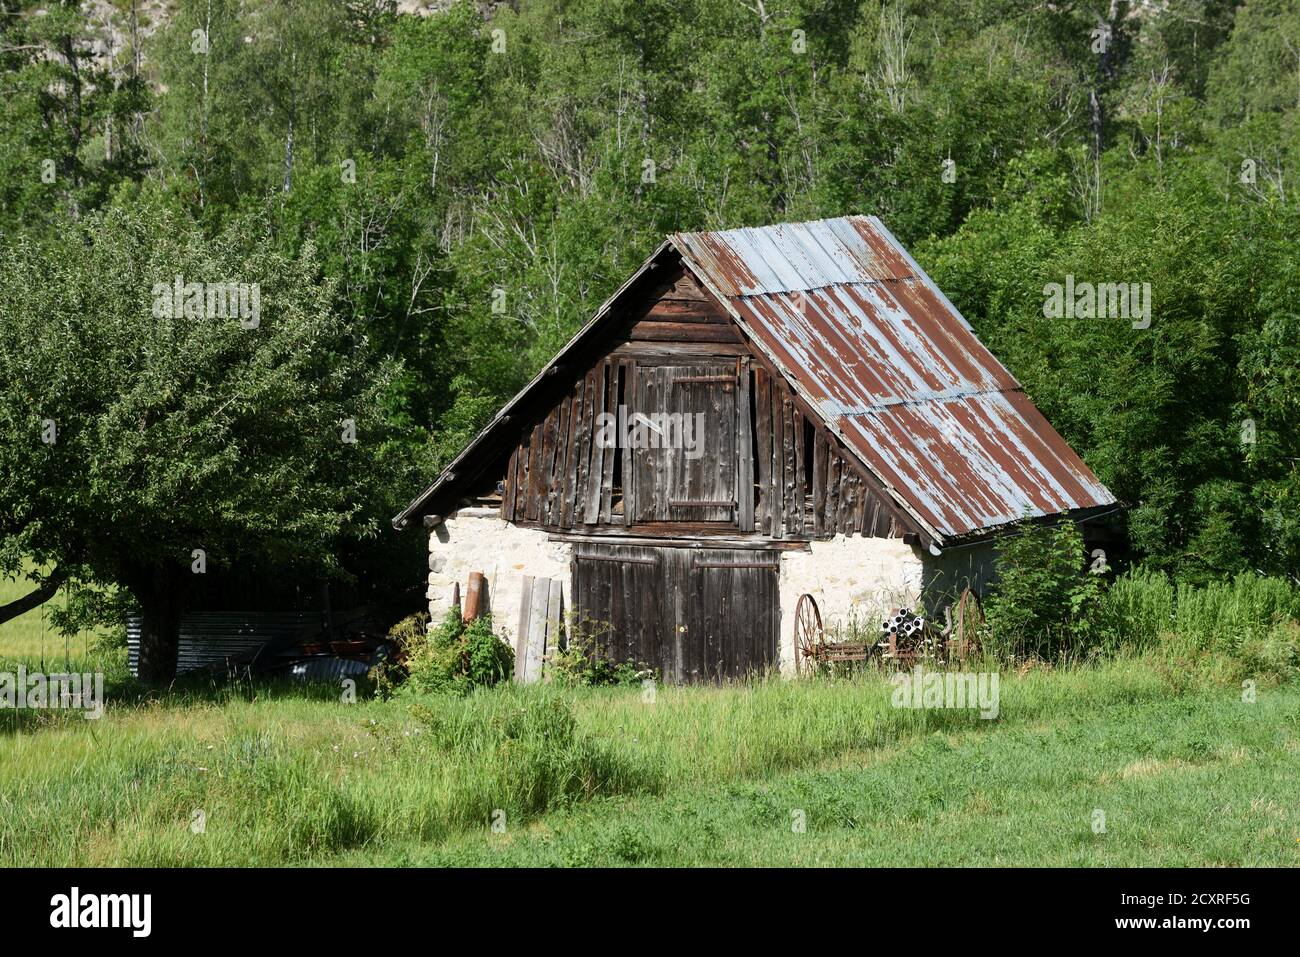 Small Alpine Hut, Agricultural Building or Rustic Chalet with Corrugated Iron Roof Allos Alpes-de-Haute-Provence Provence France Stock Photo